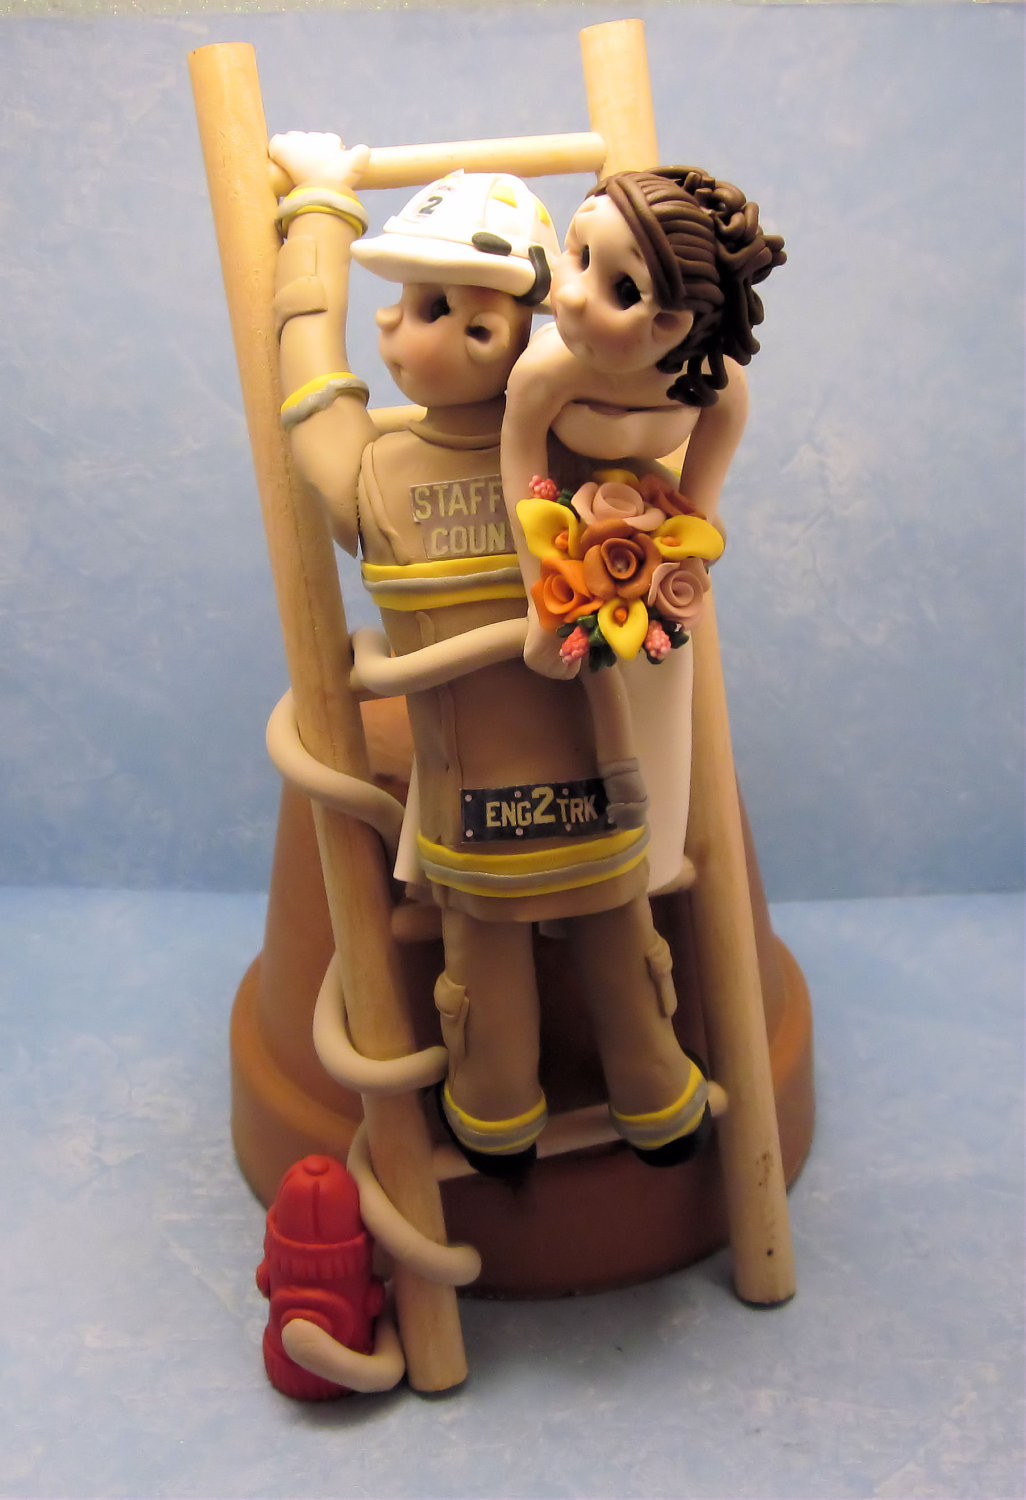 Firefighter Wedding Cake
 Bride and Groom fireman Cake topper for by